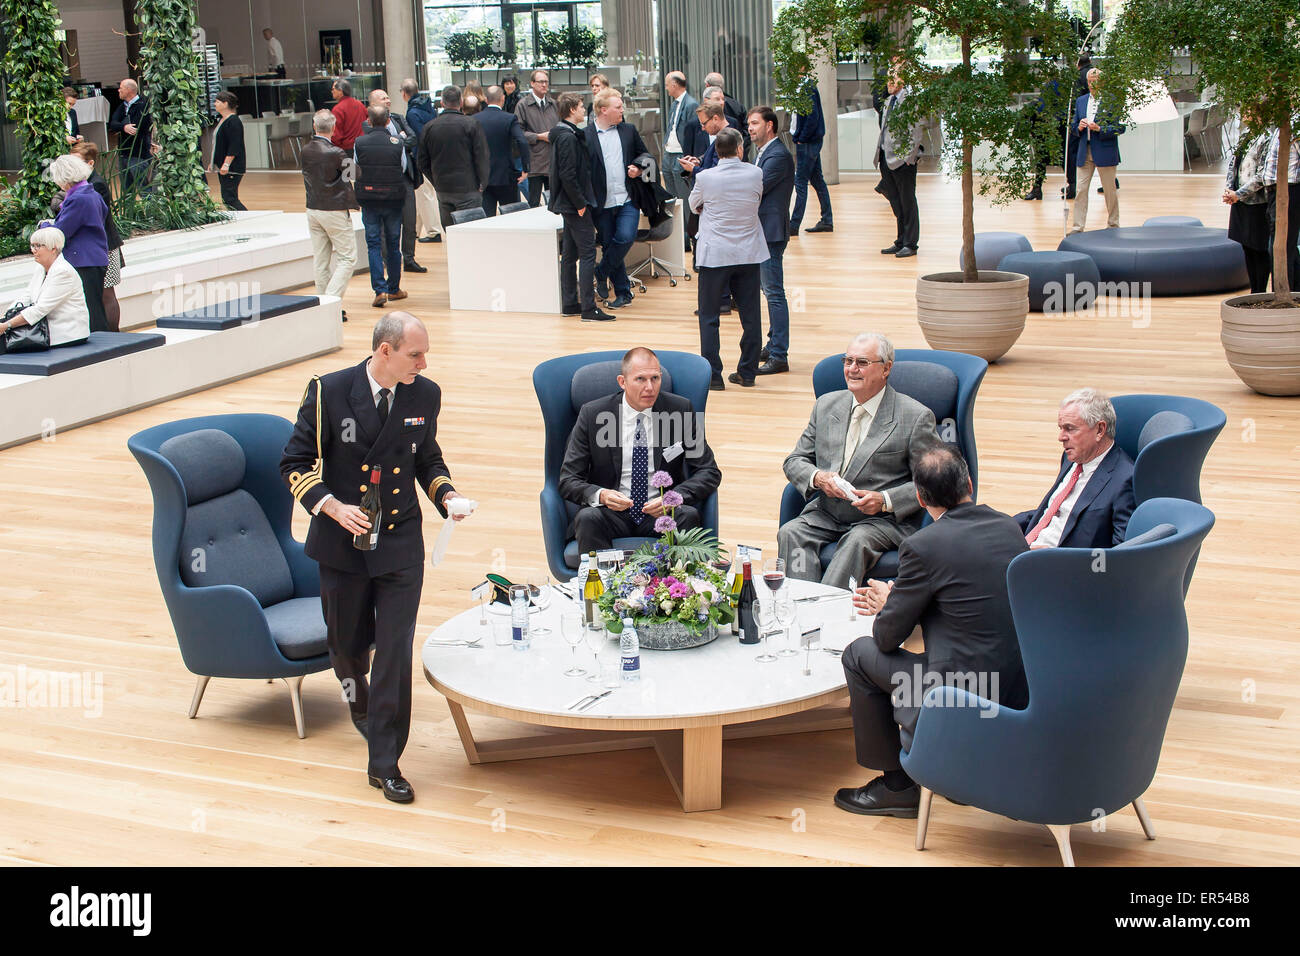 Hedehusene, Denmark, May 27th, 2015: Prince Concort Henrik  (3rd,L) and DSV’s CEO, Mr. Jens Bjorn Andersen (2nd,L) talks at the reception hall at DSv’s head quarter in Hedehusene. The Prince Concort has just unveiled his new sculpture, “The Creative Hand” in front of DSV’s entrance Credit:  OJPHOTOS/Alamy Live News Stock Photo